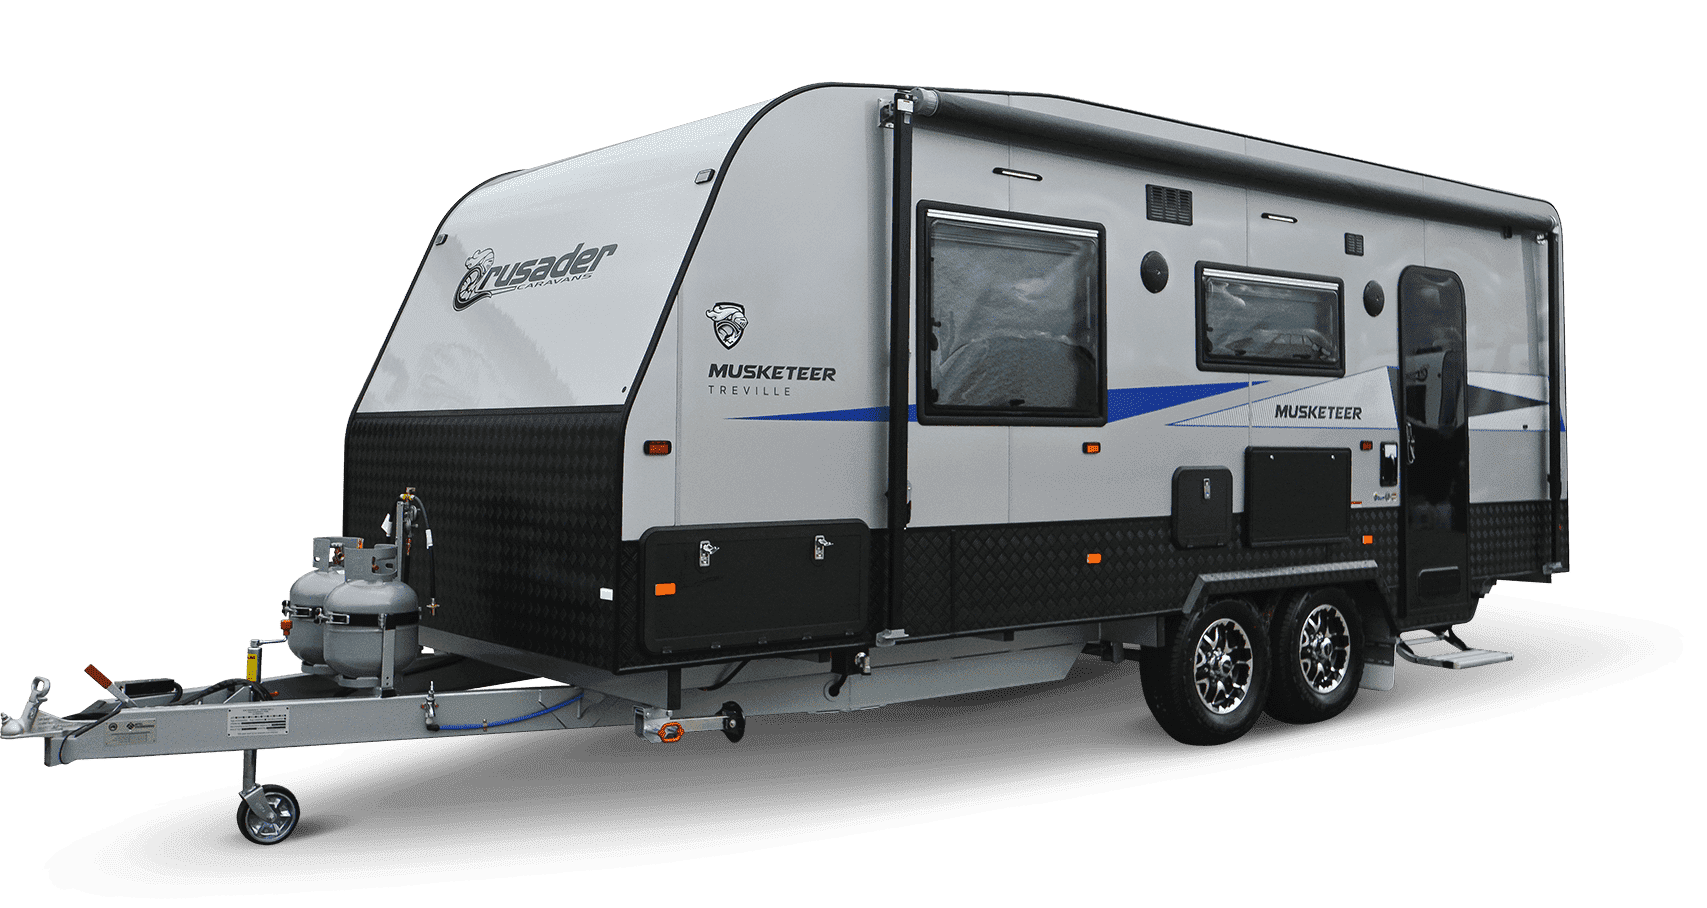 New Musketeer Treville caravan for sale at Lewis Rv.